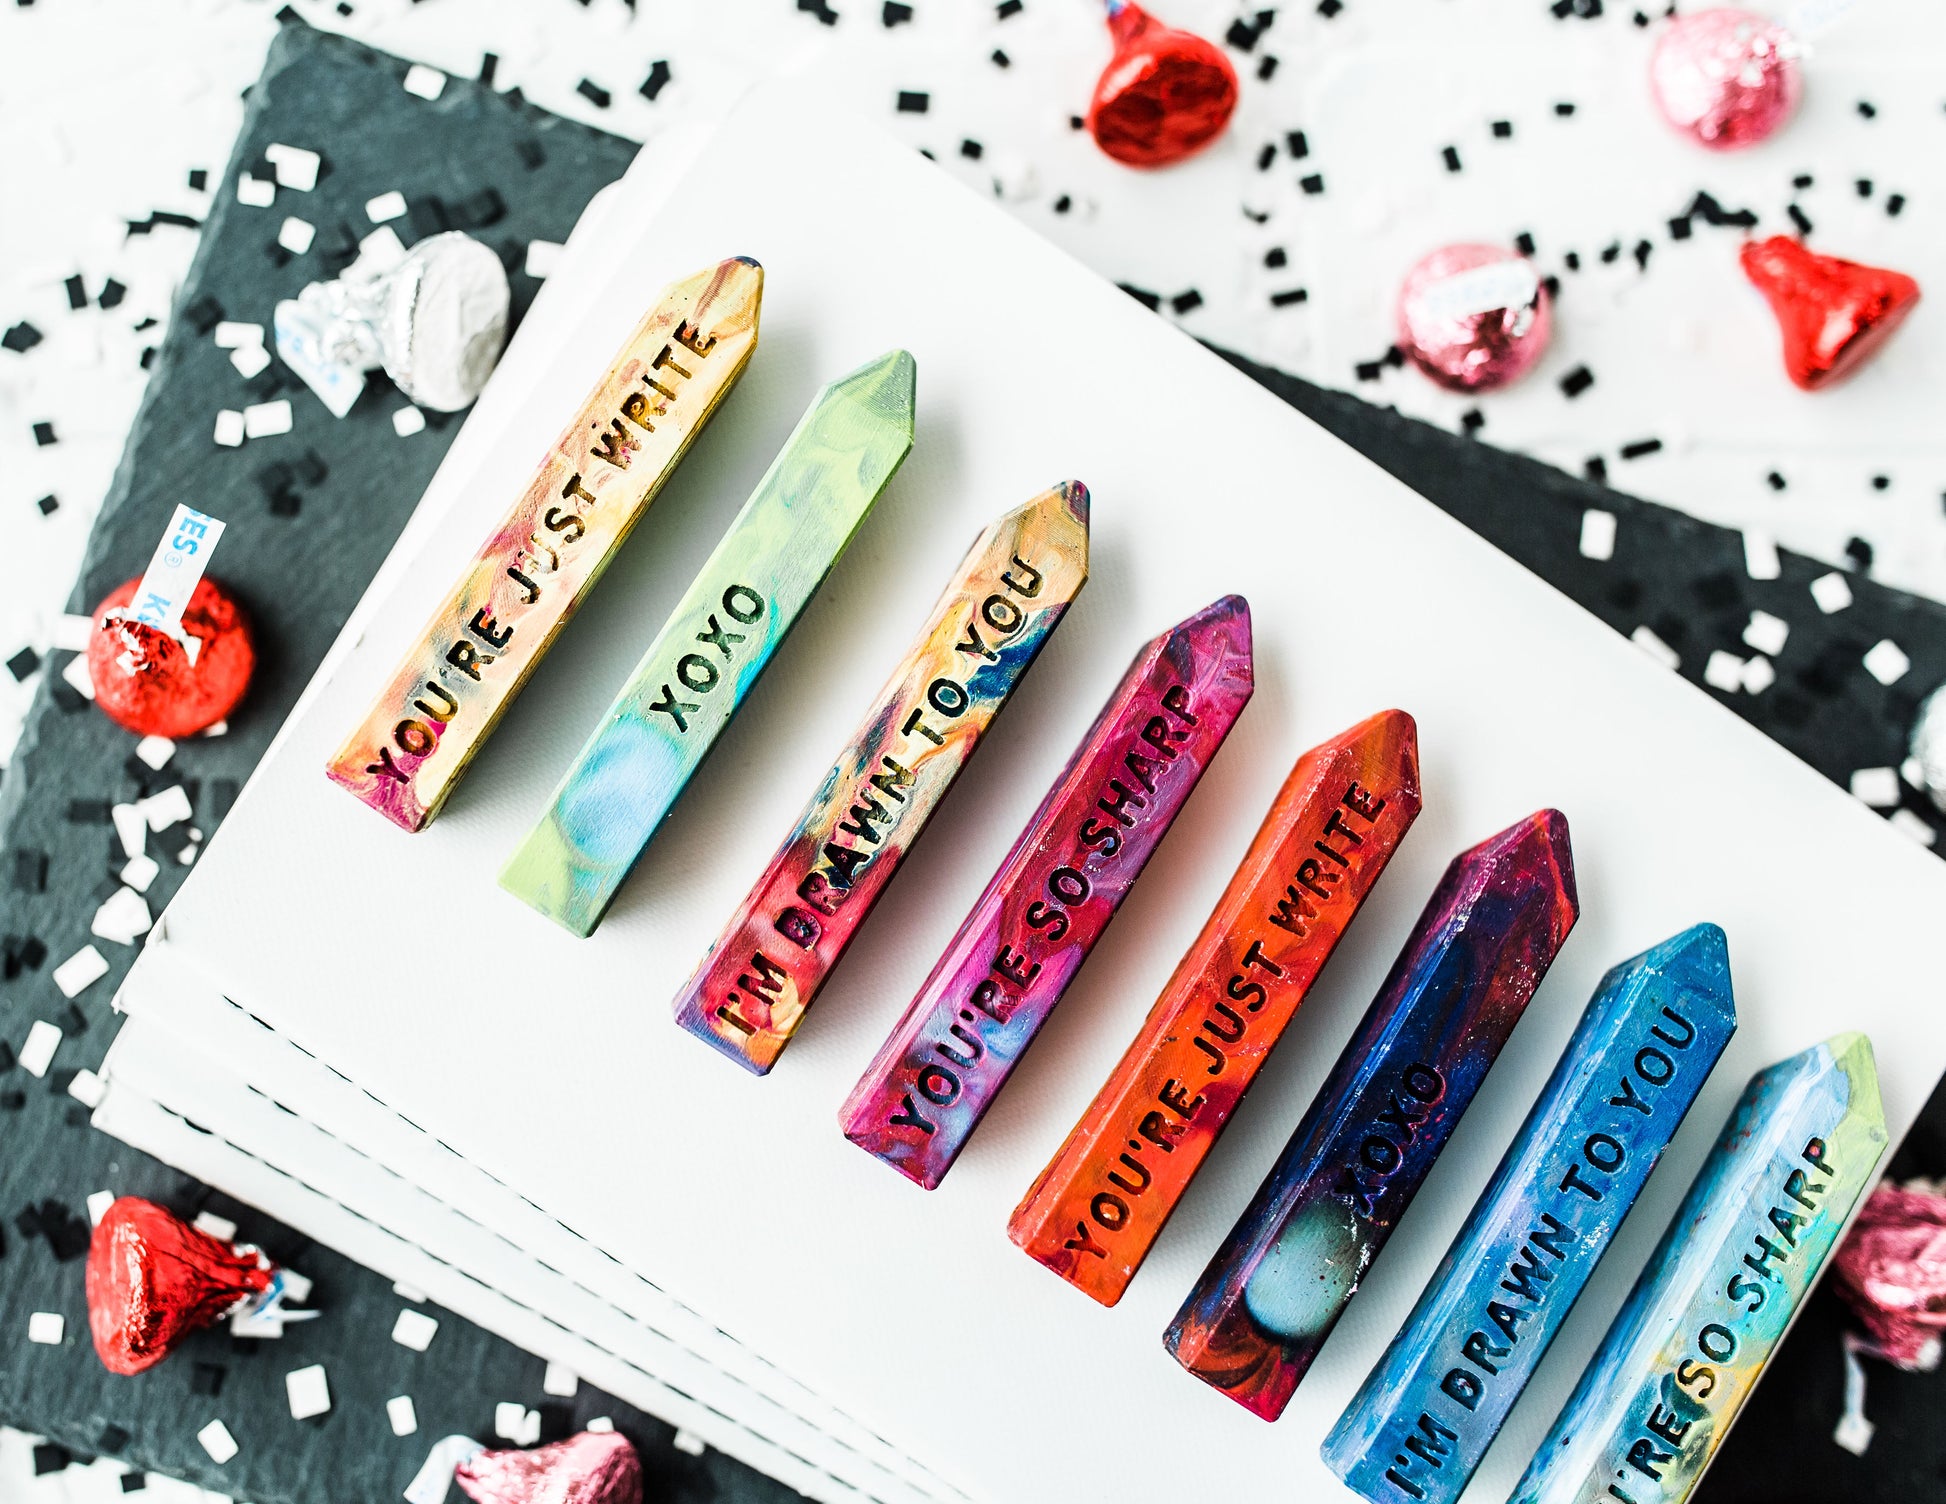 Valentine's Day Classroom Favors for Kids, Rainbow Crayon Stix, Multi-colored crayon crafts  for Valentine's Day - Kids Valentines Day Gift Original Rainbow Crayon® Gift Set from Art 2 the Extreme®. Wonderful sayings for personalized valentines gifts for kids.